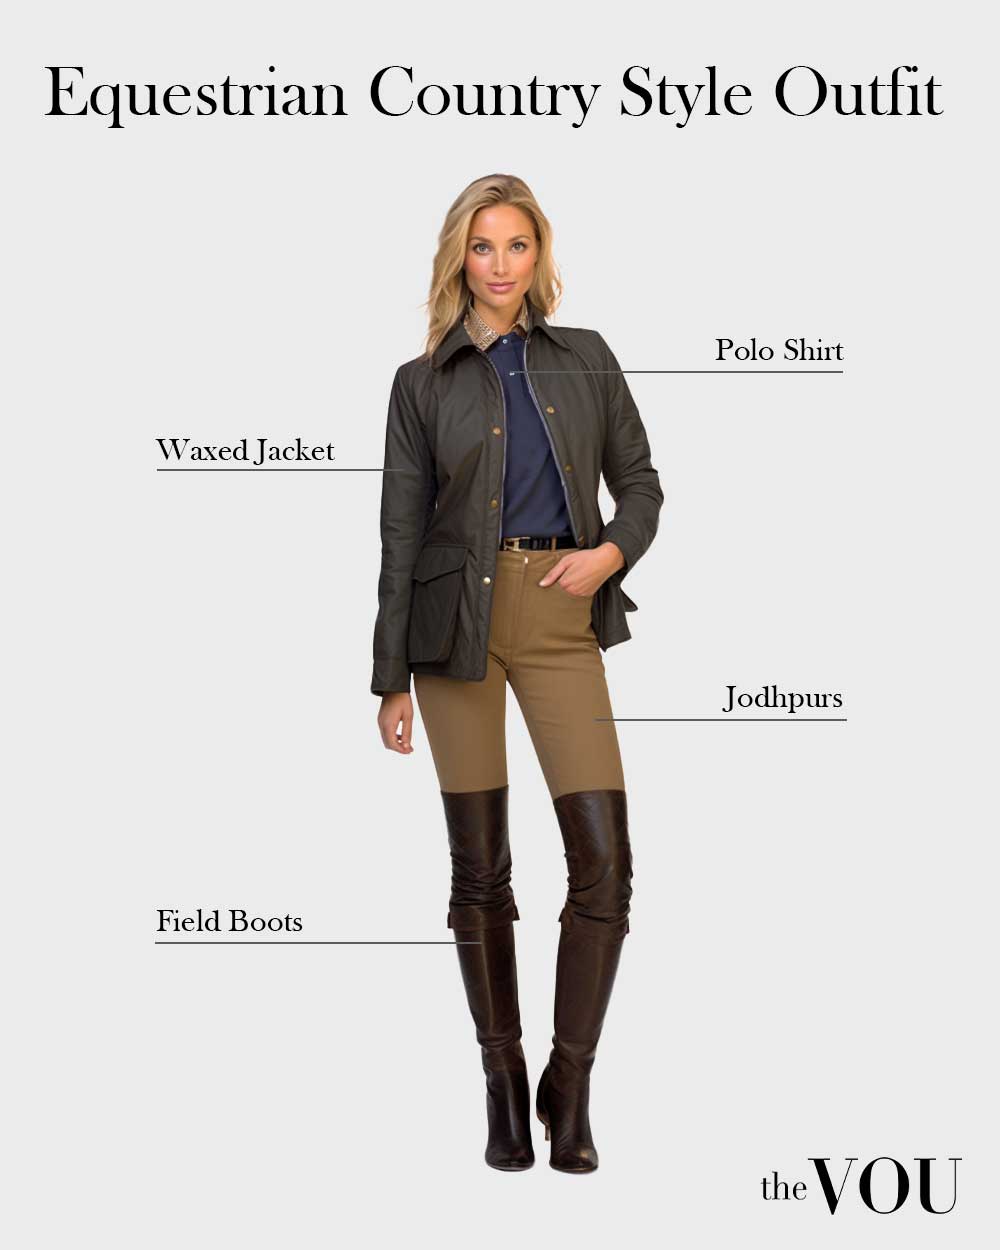 Equestrian Country Style Outfit